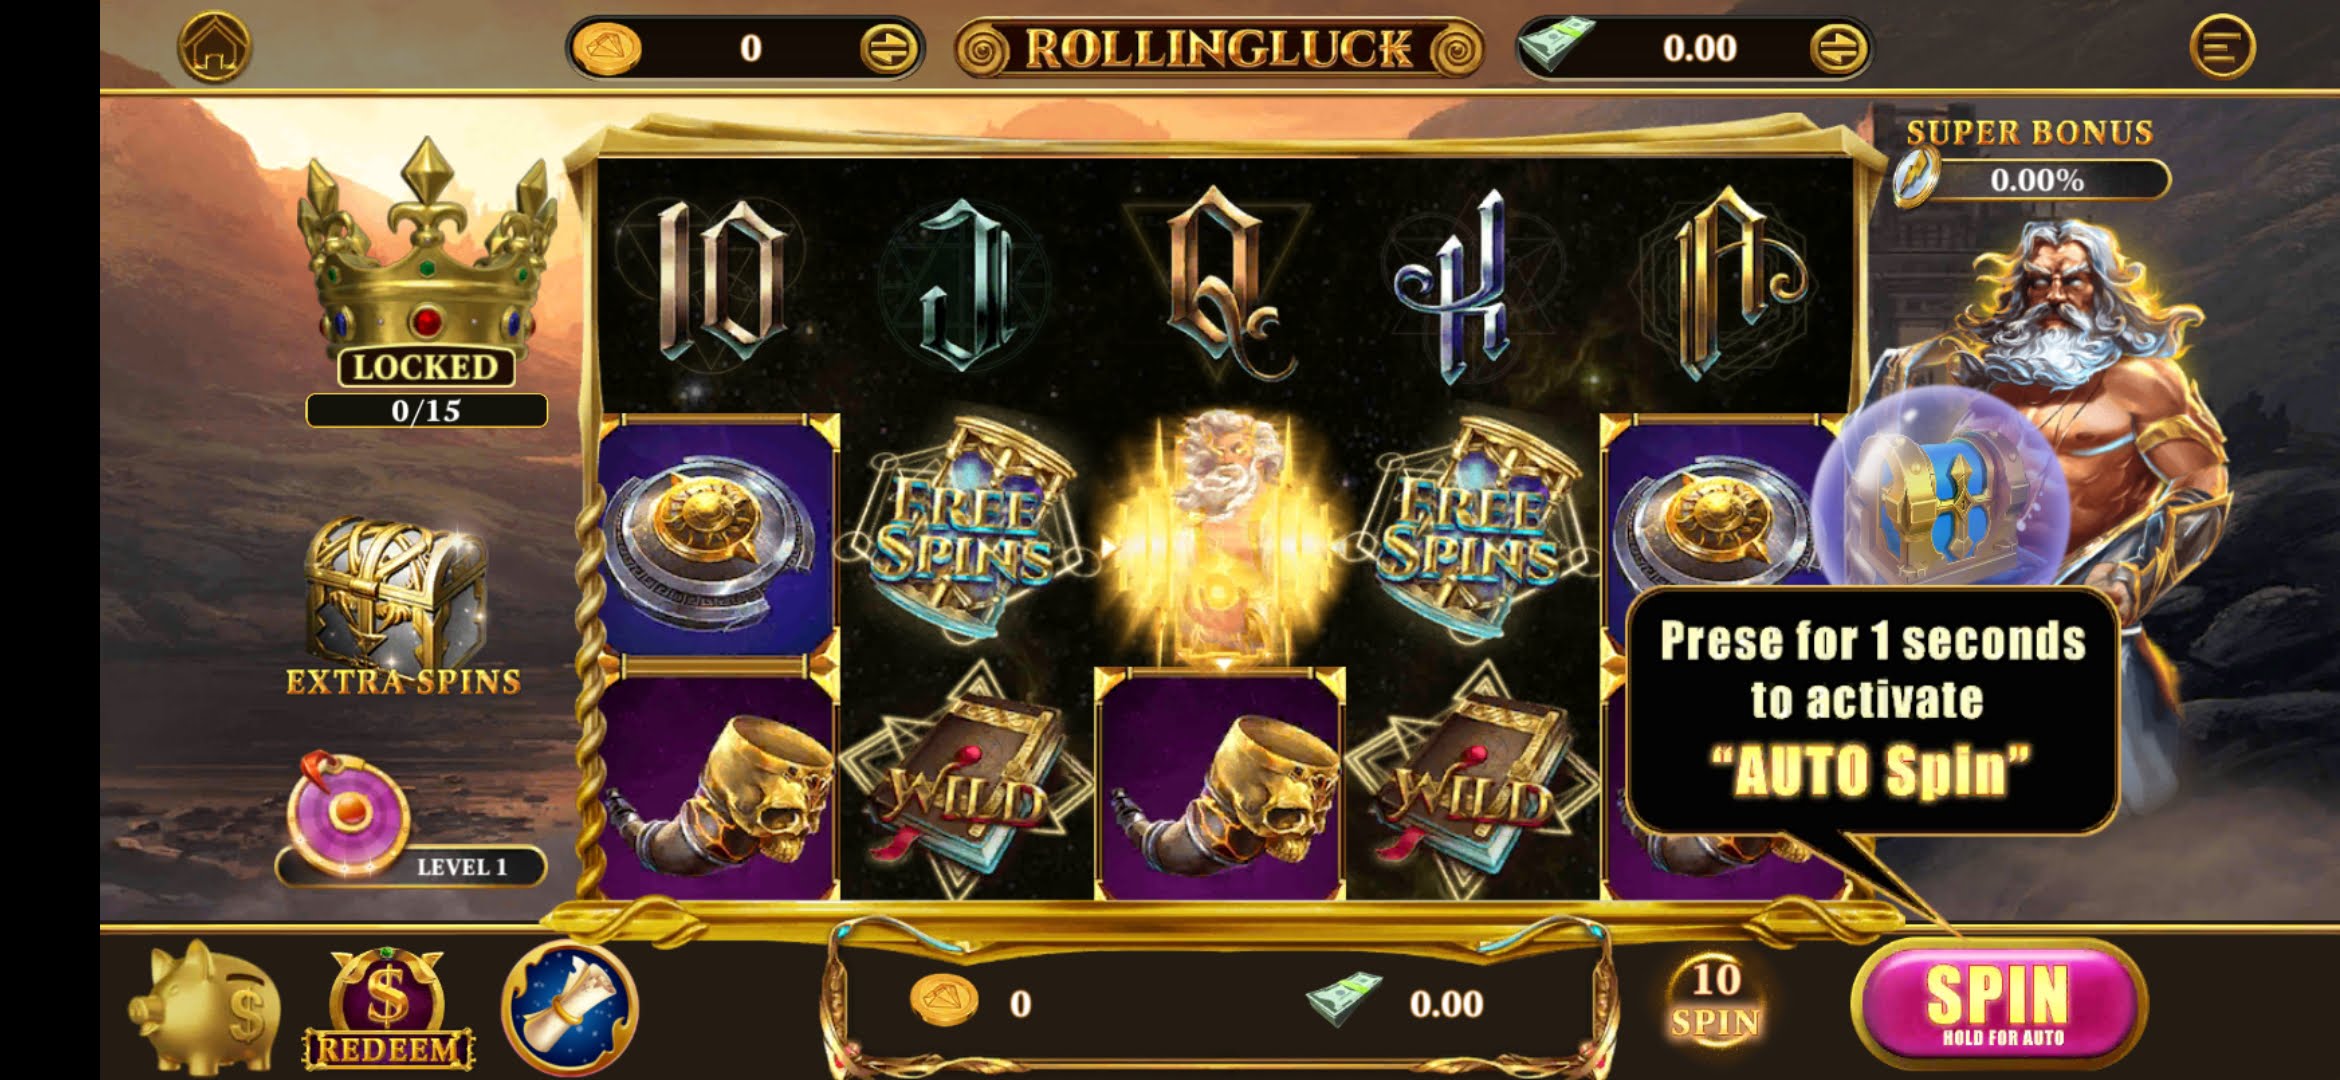 Rolling Luck App game interface